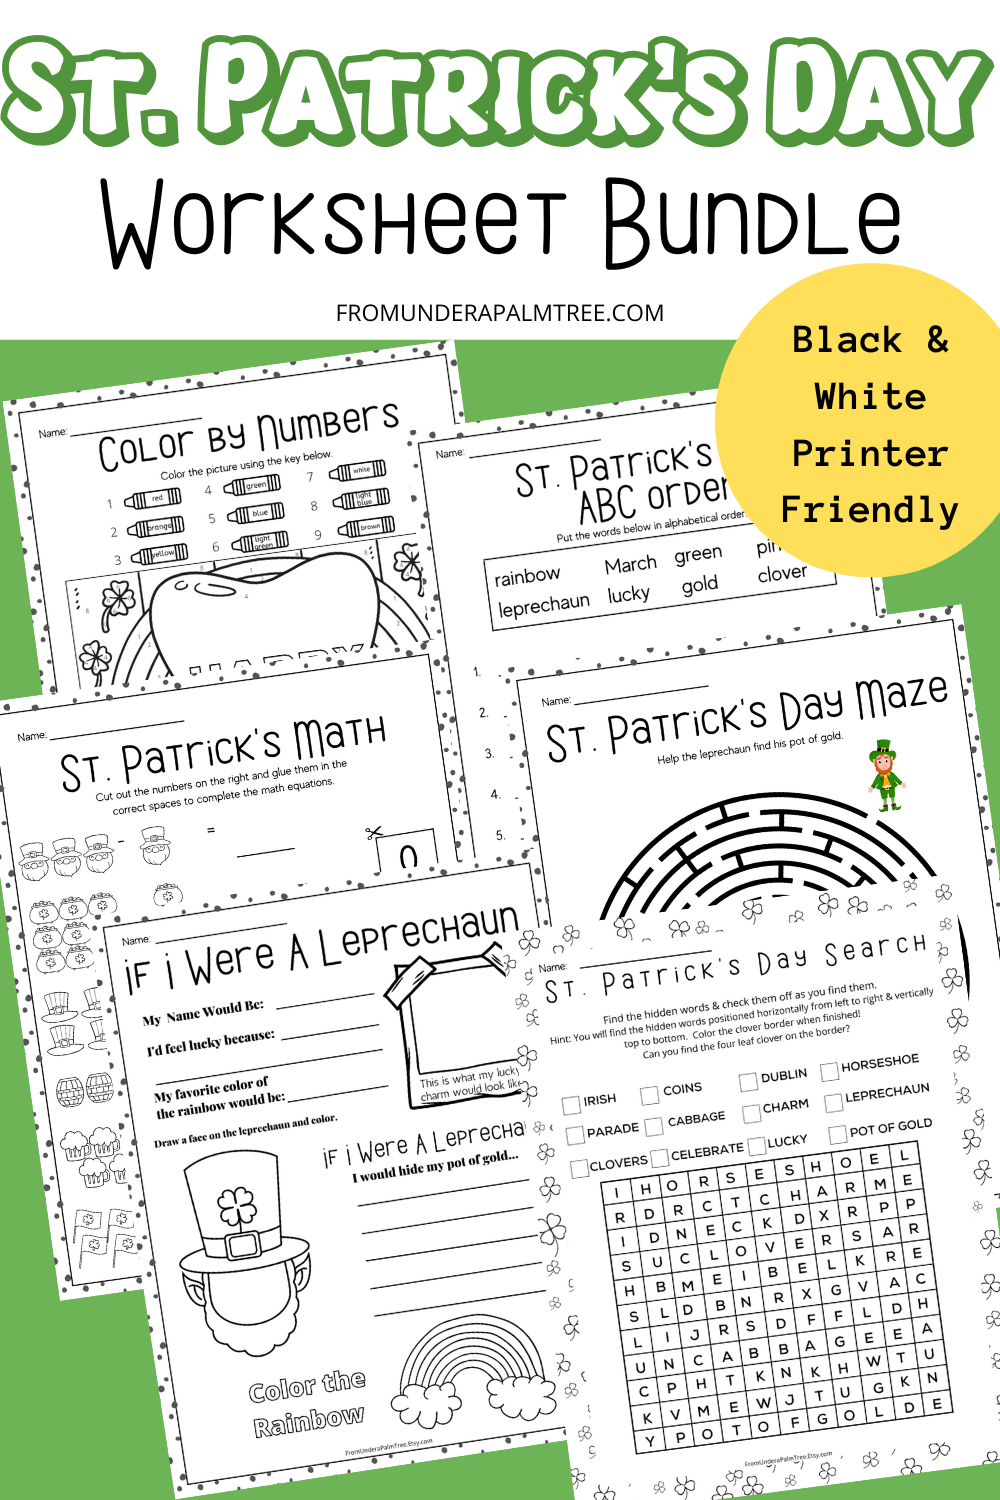 st pattys day | St Patricks Day | St Patricks Day worksheets | St Patricks Day activities | St Patricks Day fun | St Patricks Day resources | St Patricks Day printables | St Patricks Day downloads | classroom resources | St Pattys Day printables | St Pattys Day worksheets | St Pattys Day printables | st patricks day word search | st patricks day color by numbers | st patricks day math | st patricks day maze | st patricks day guided writing | If I were a leprechaun | digital download | printables for kids | first grade worksheets | kindergarten worksheets | sta patricks day game |